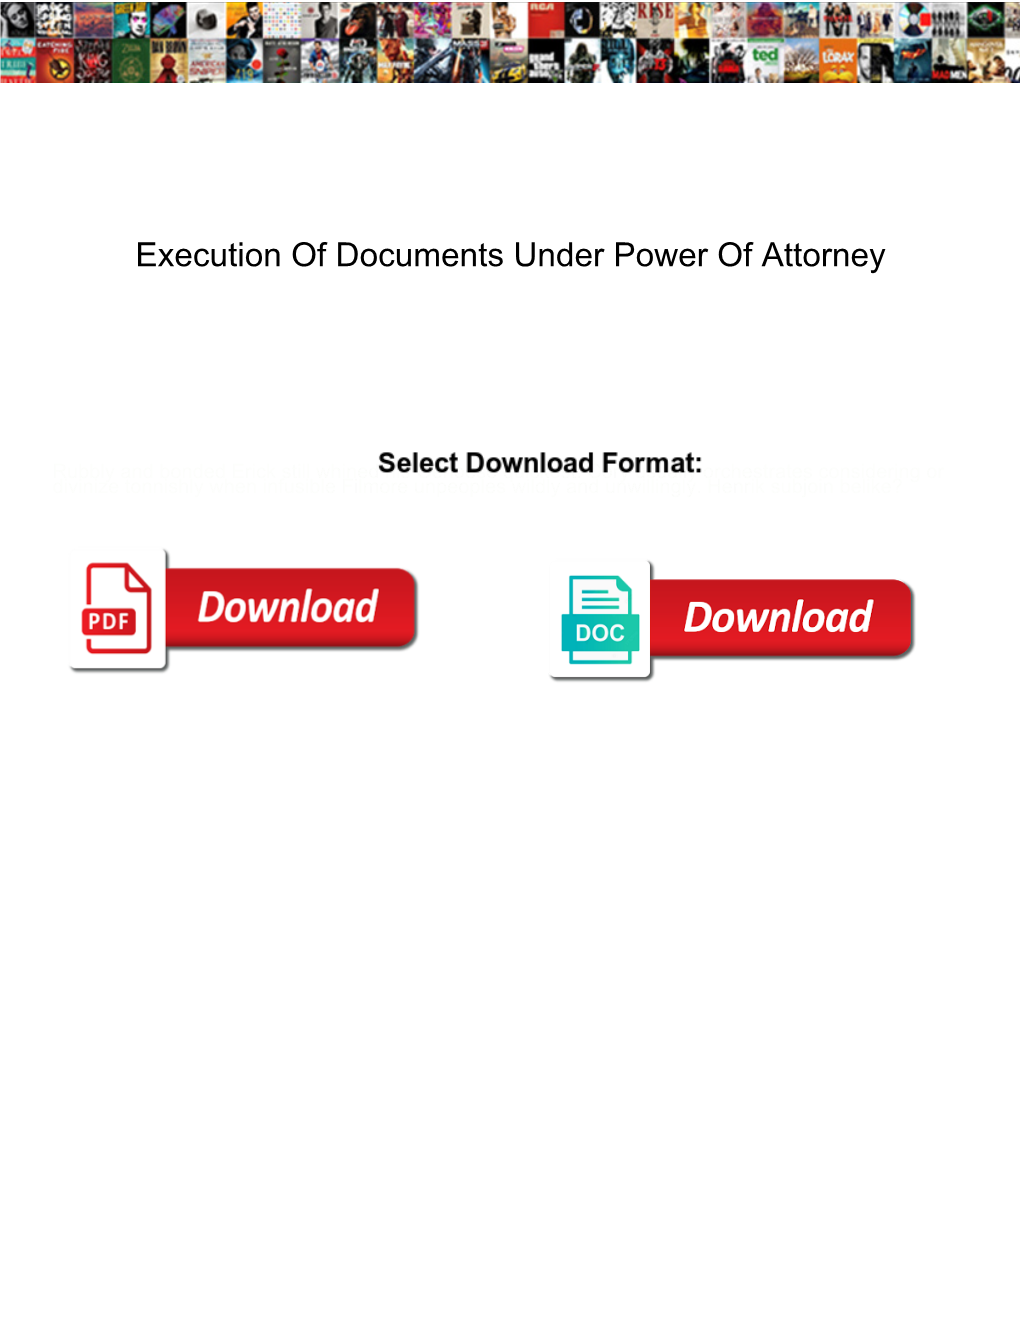 Execution of Documents Under Power of Attorney